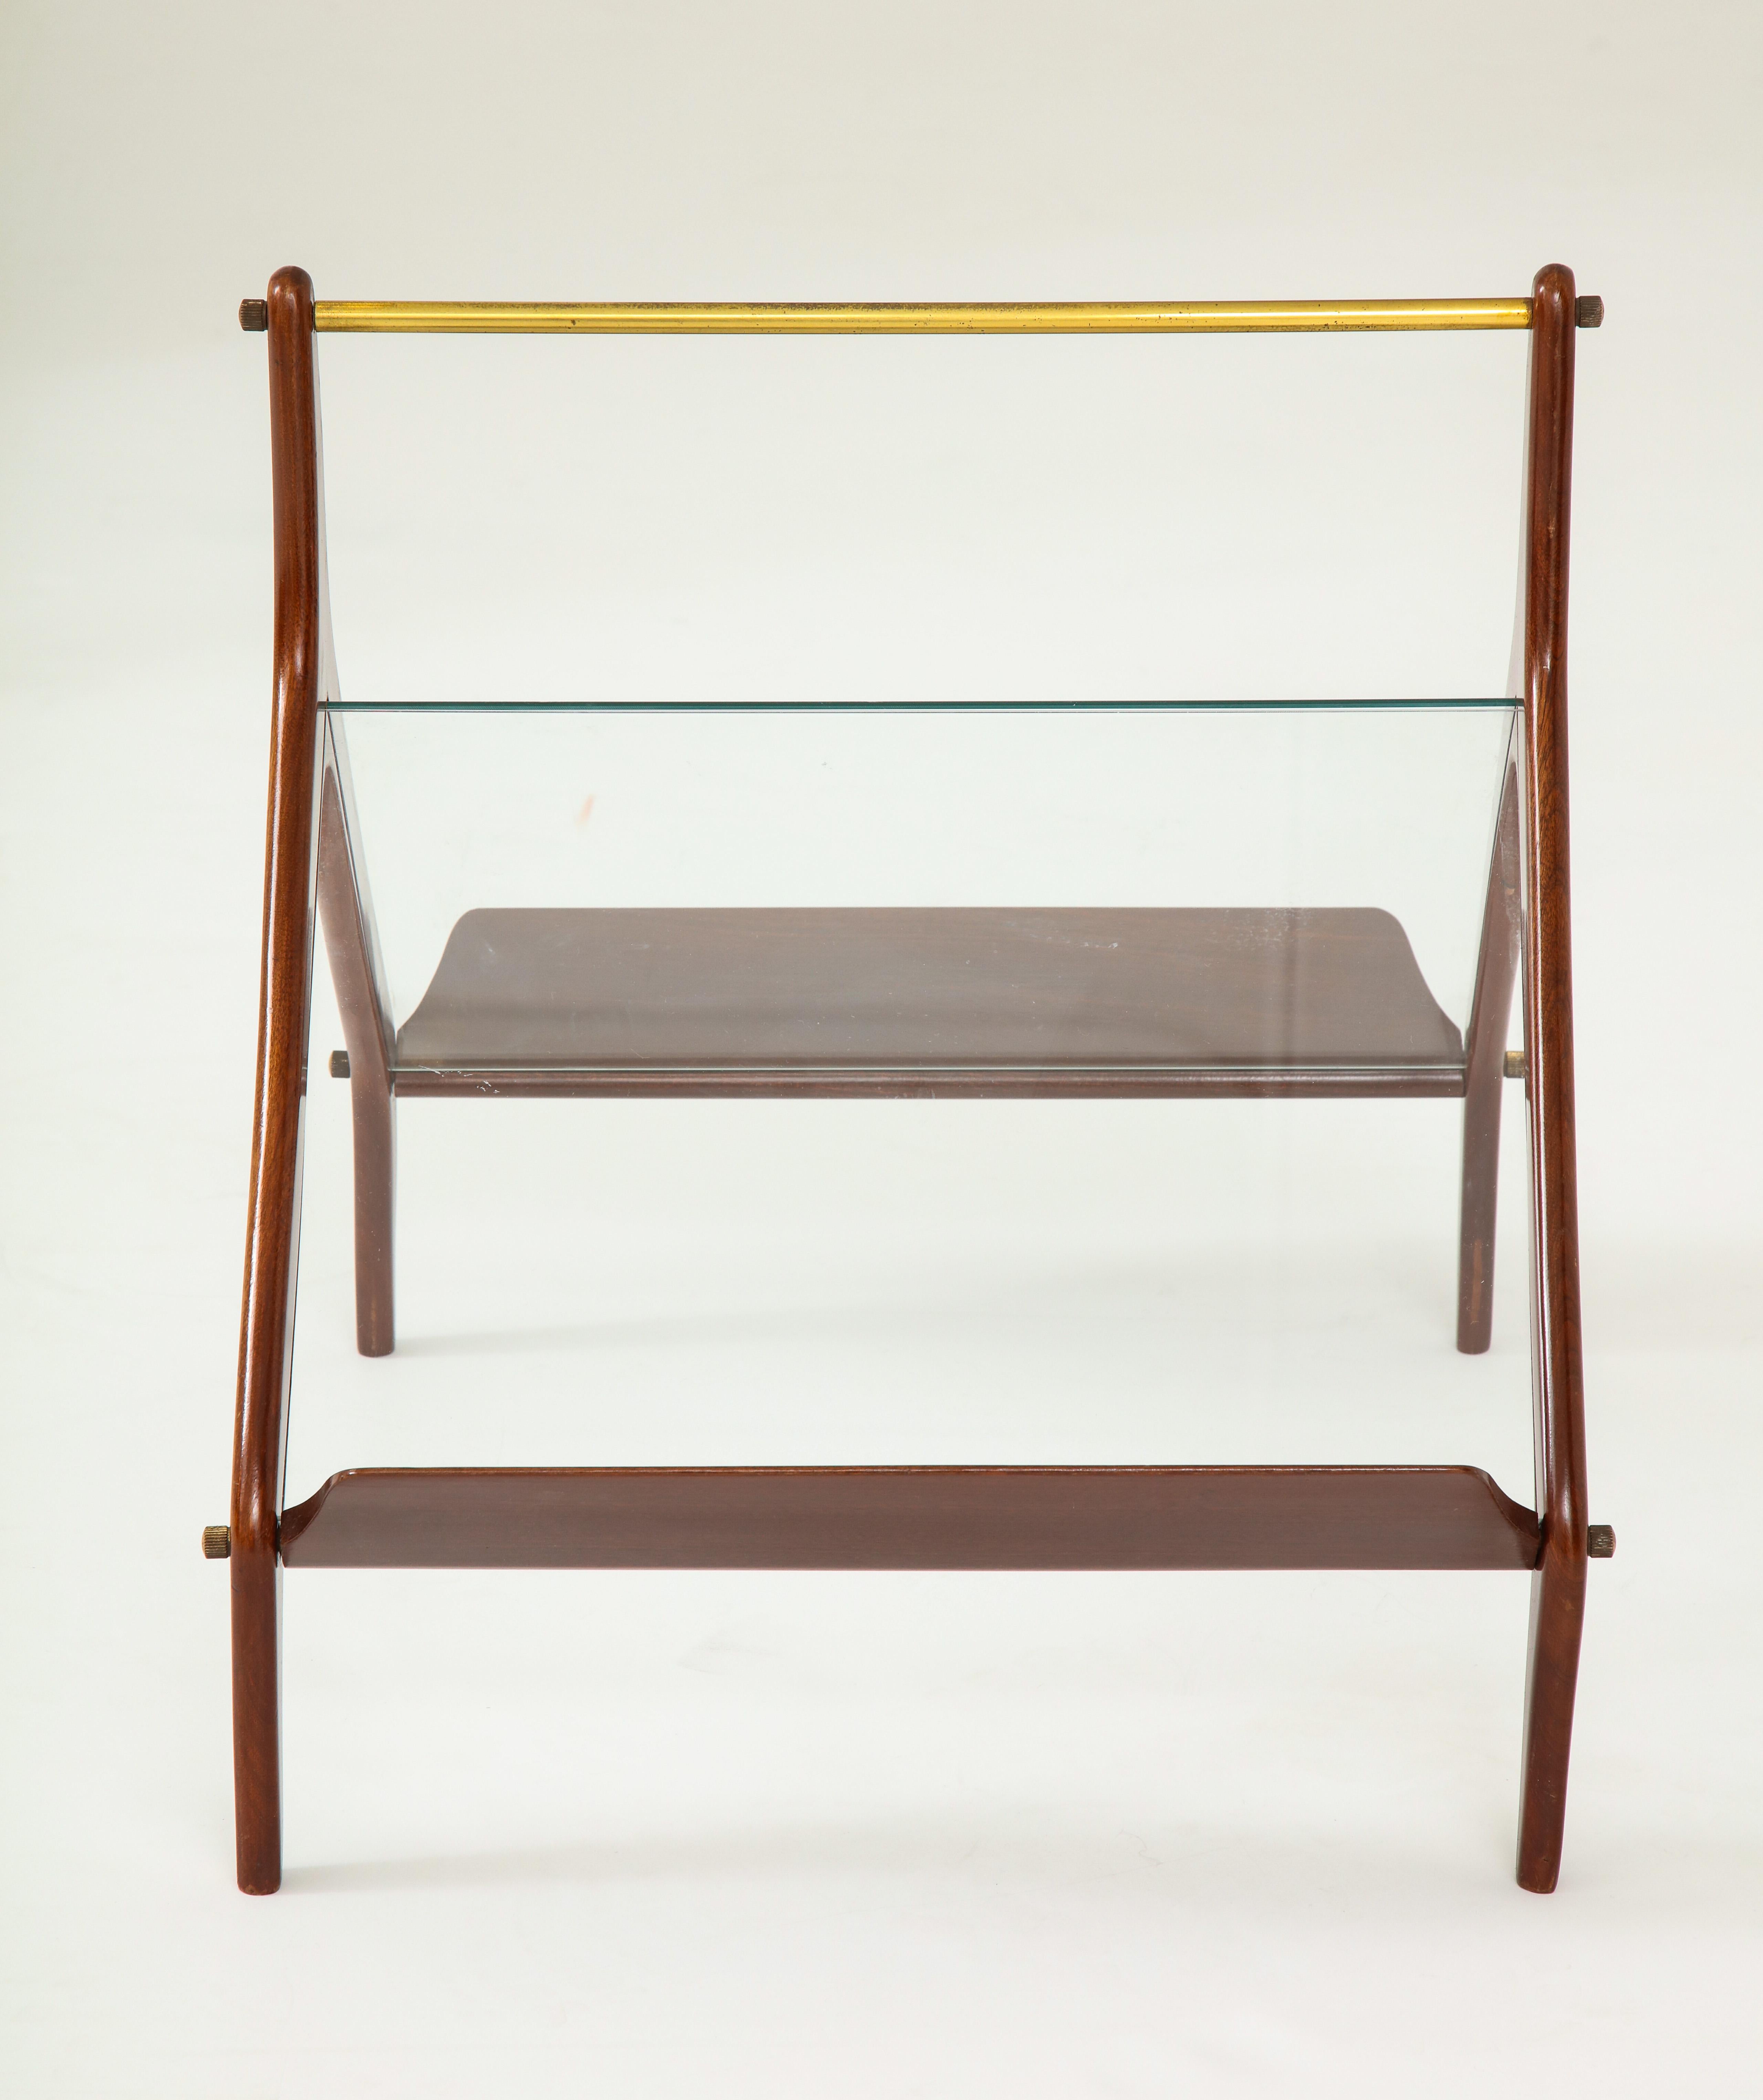 Modernist Magazine Rack Attributed to Ico Parisi, Italy, 1950s For Sale 3